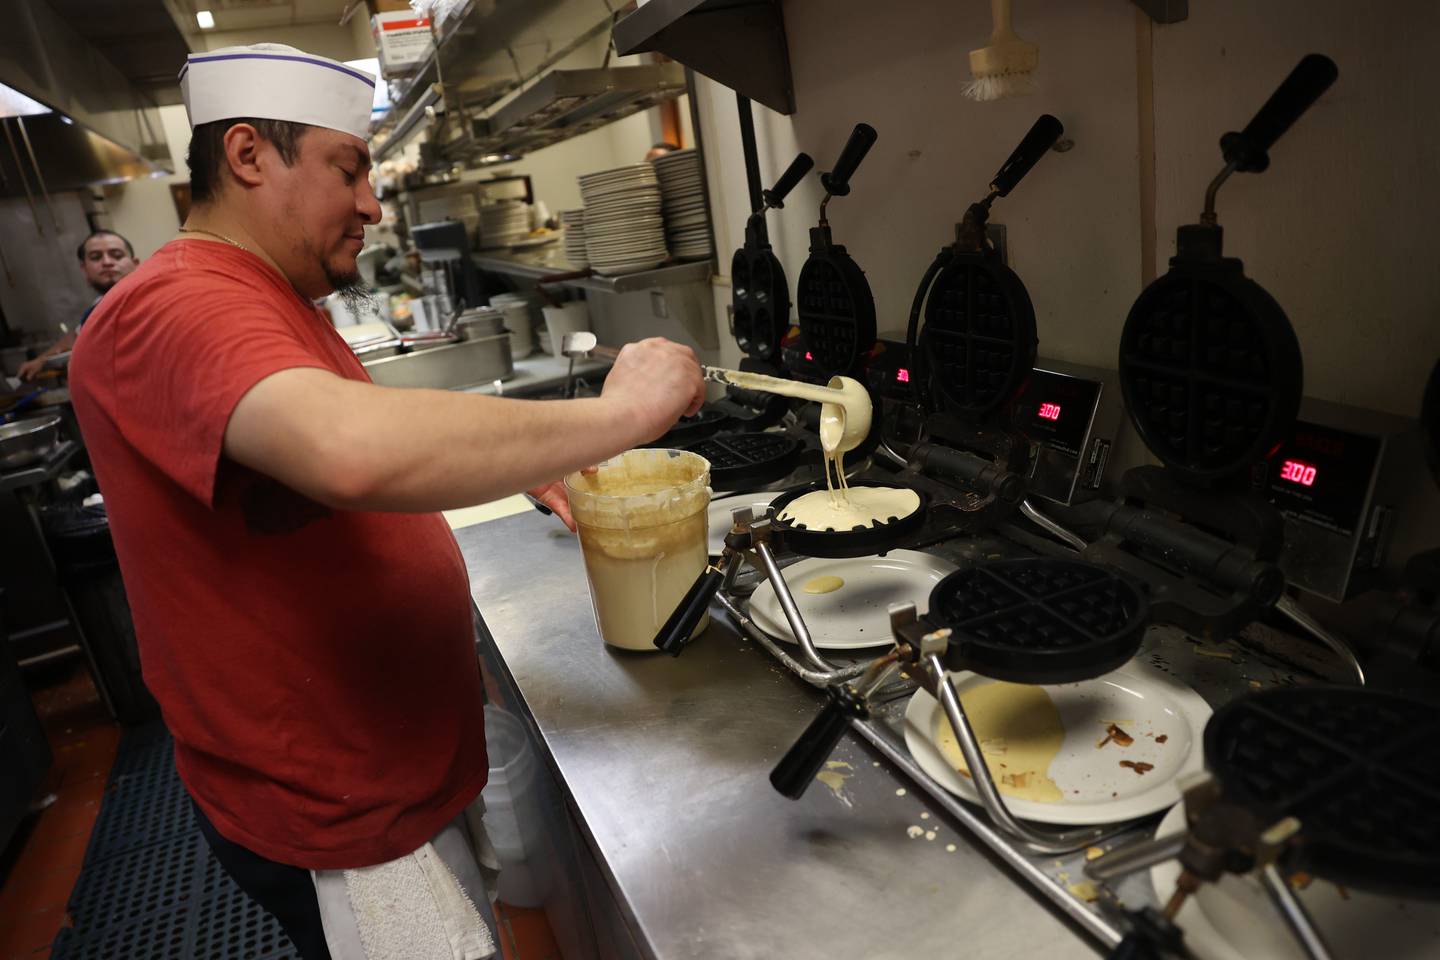 Pedro Hernandez prepares a waffle order at Tasty Waffle in Romeoville.